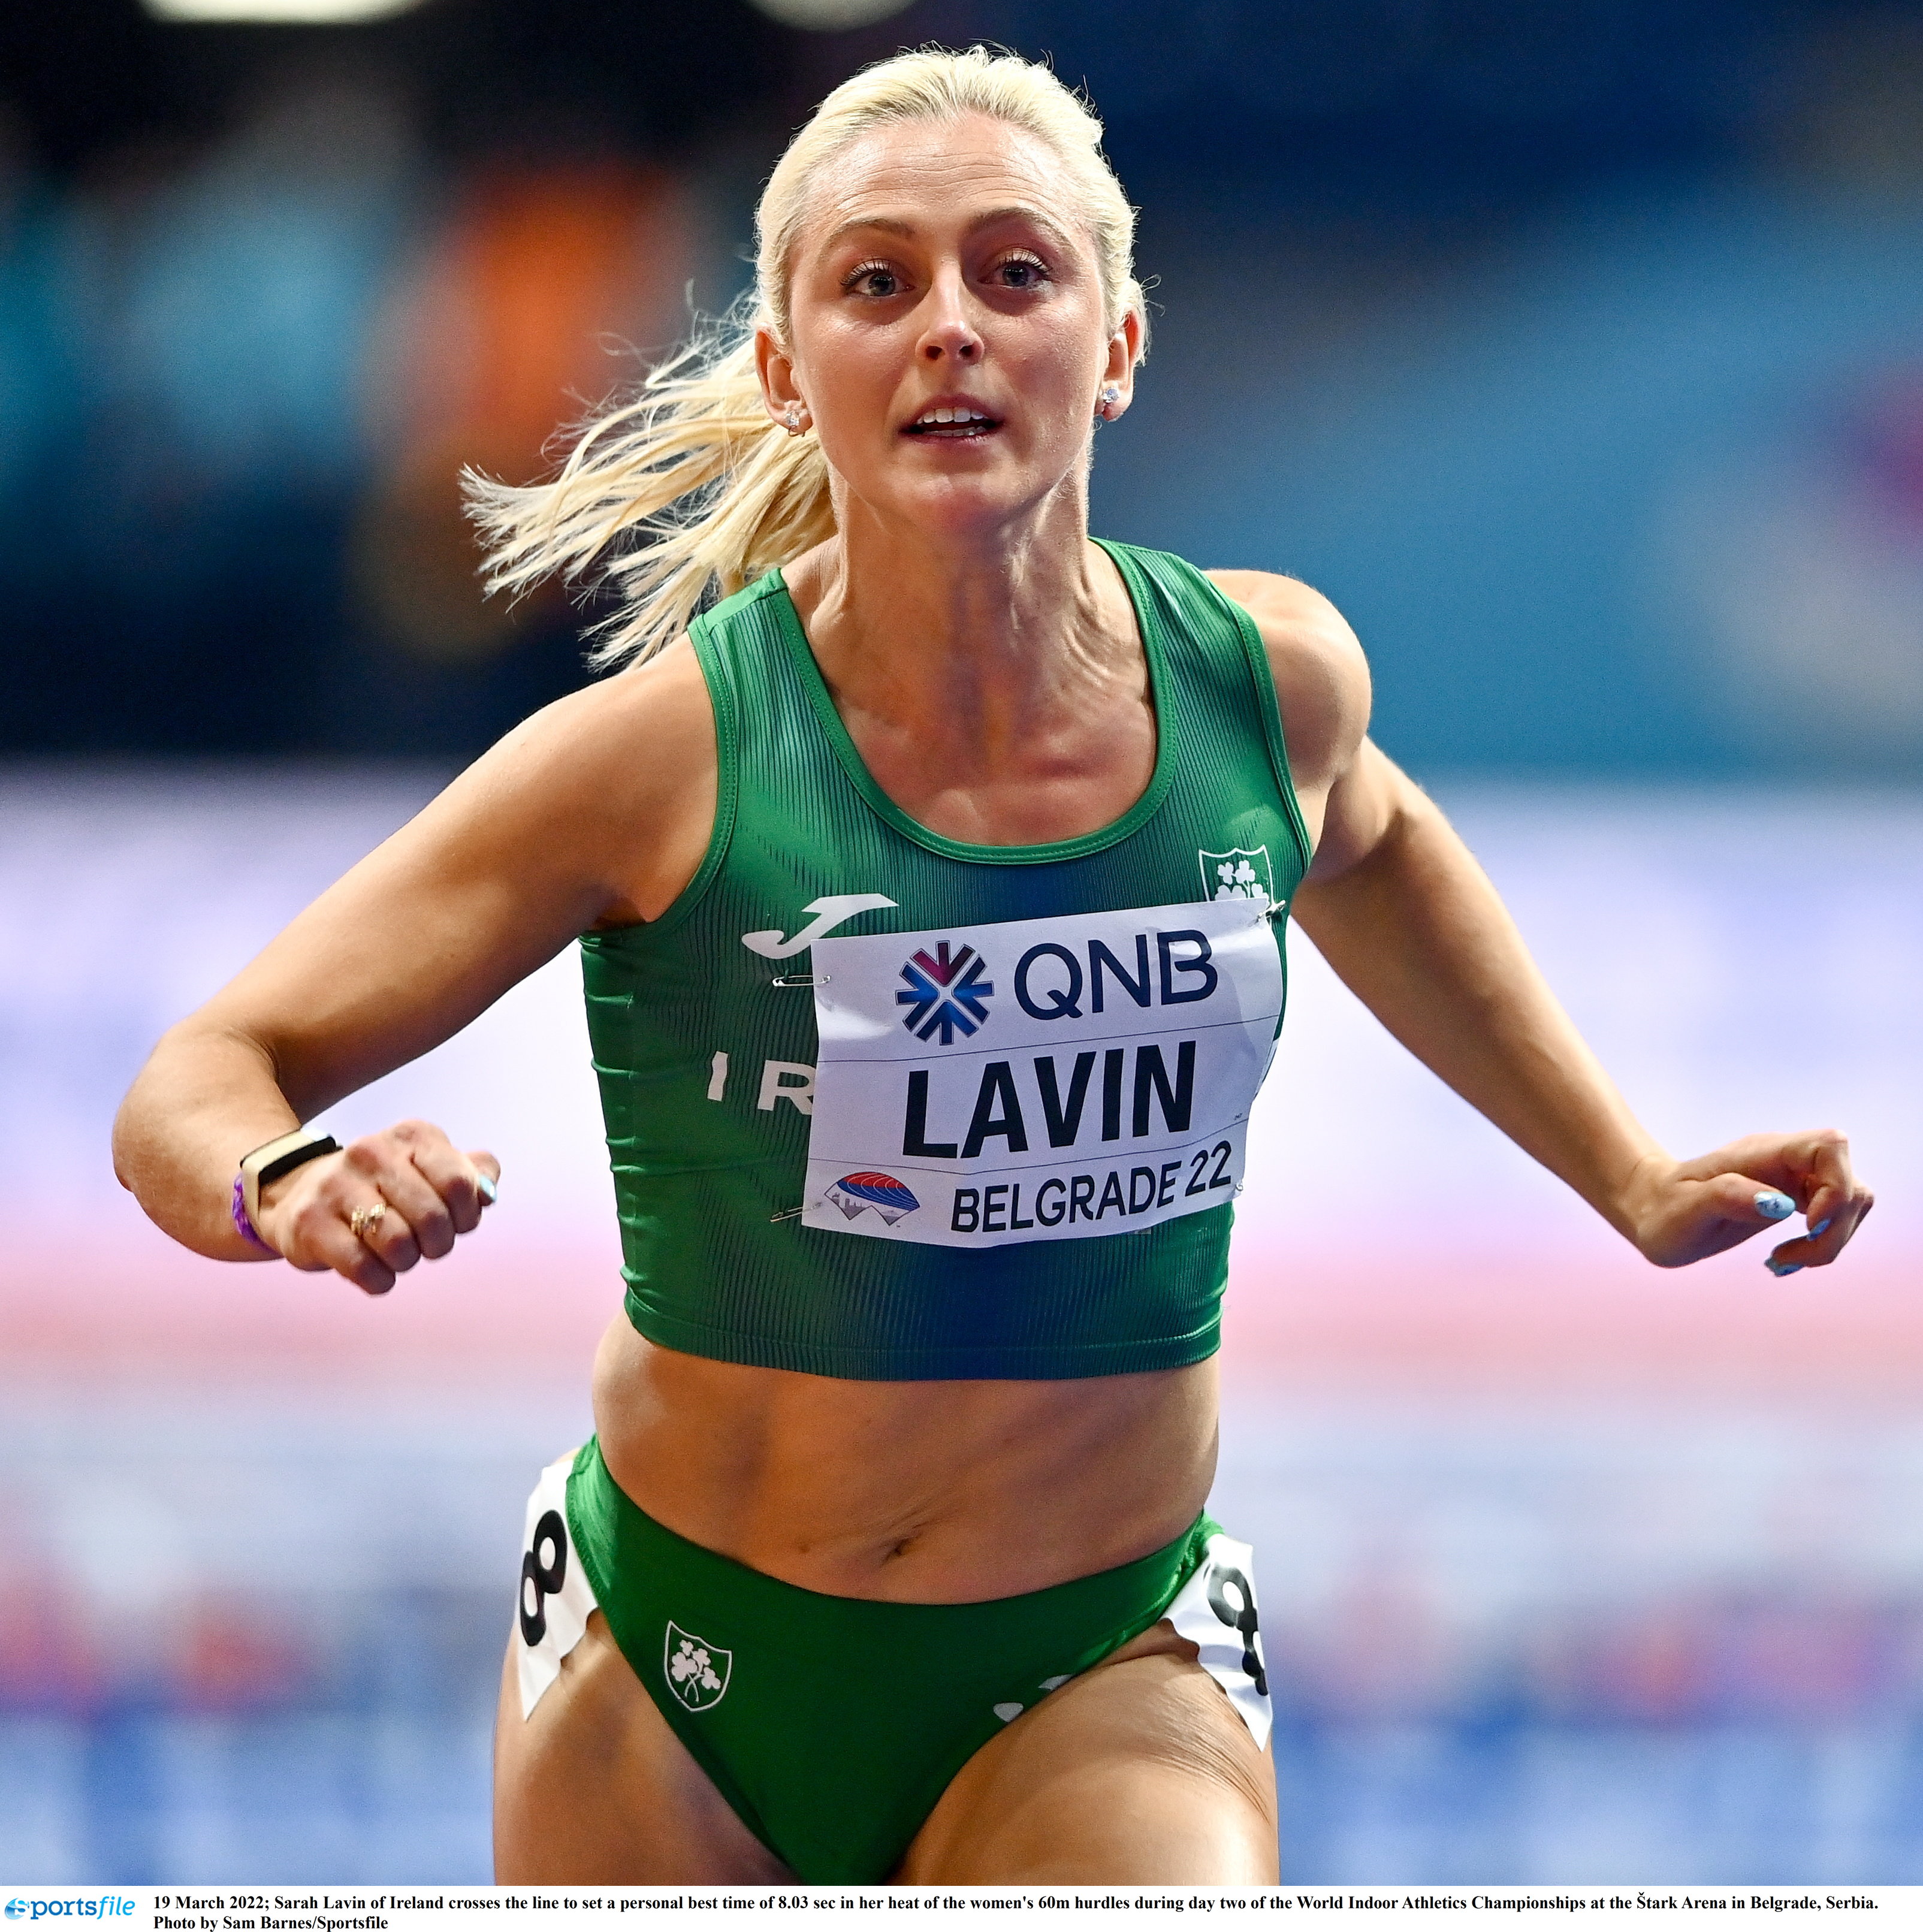 Olympian Sarah Lavin comes out on top in Germany